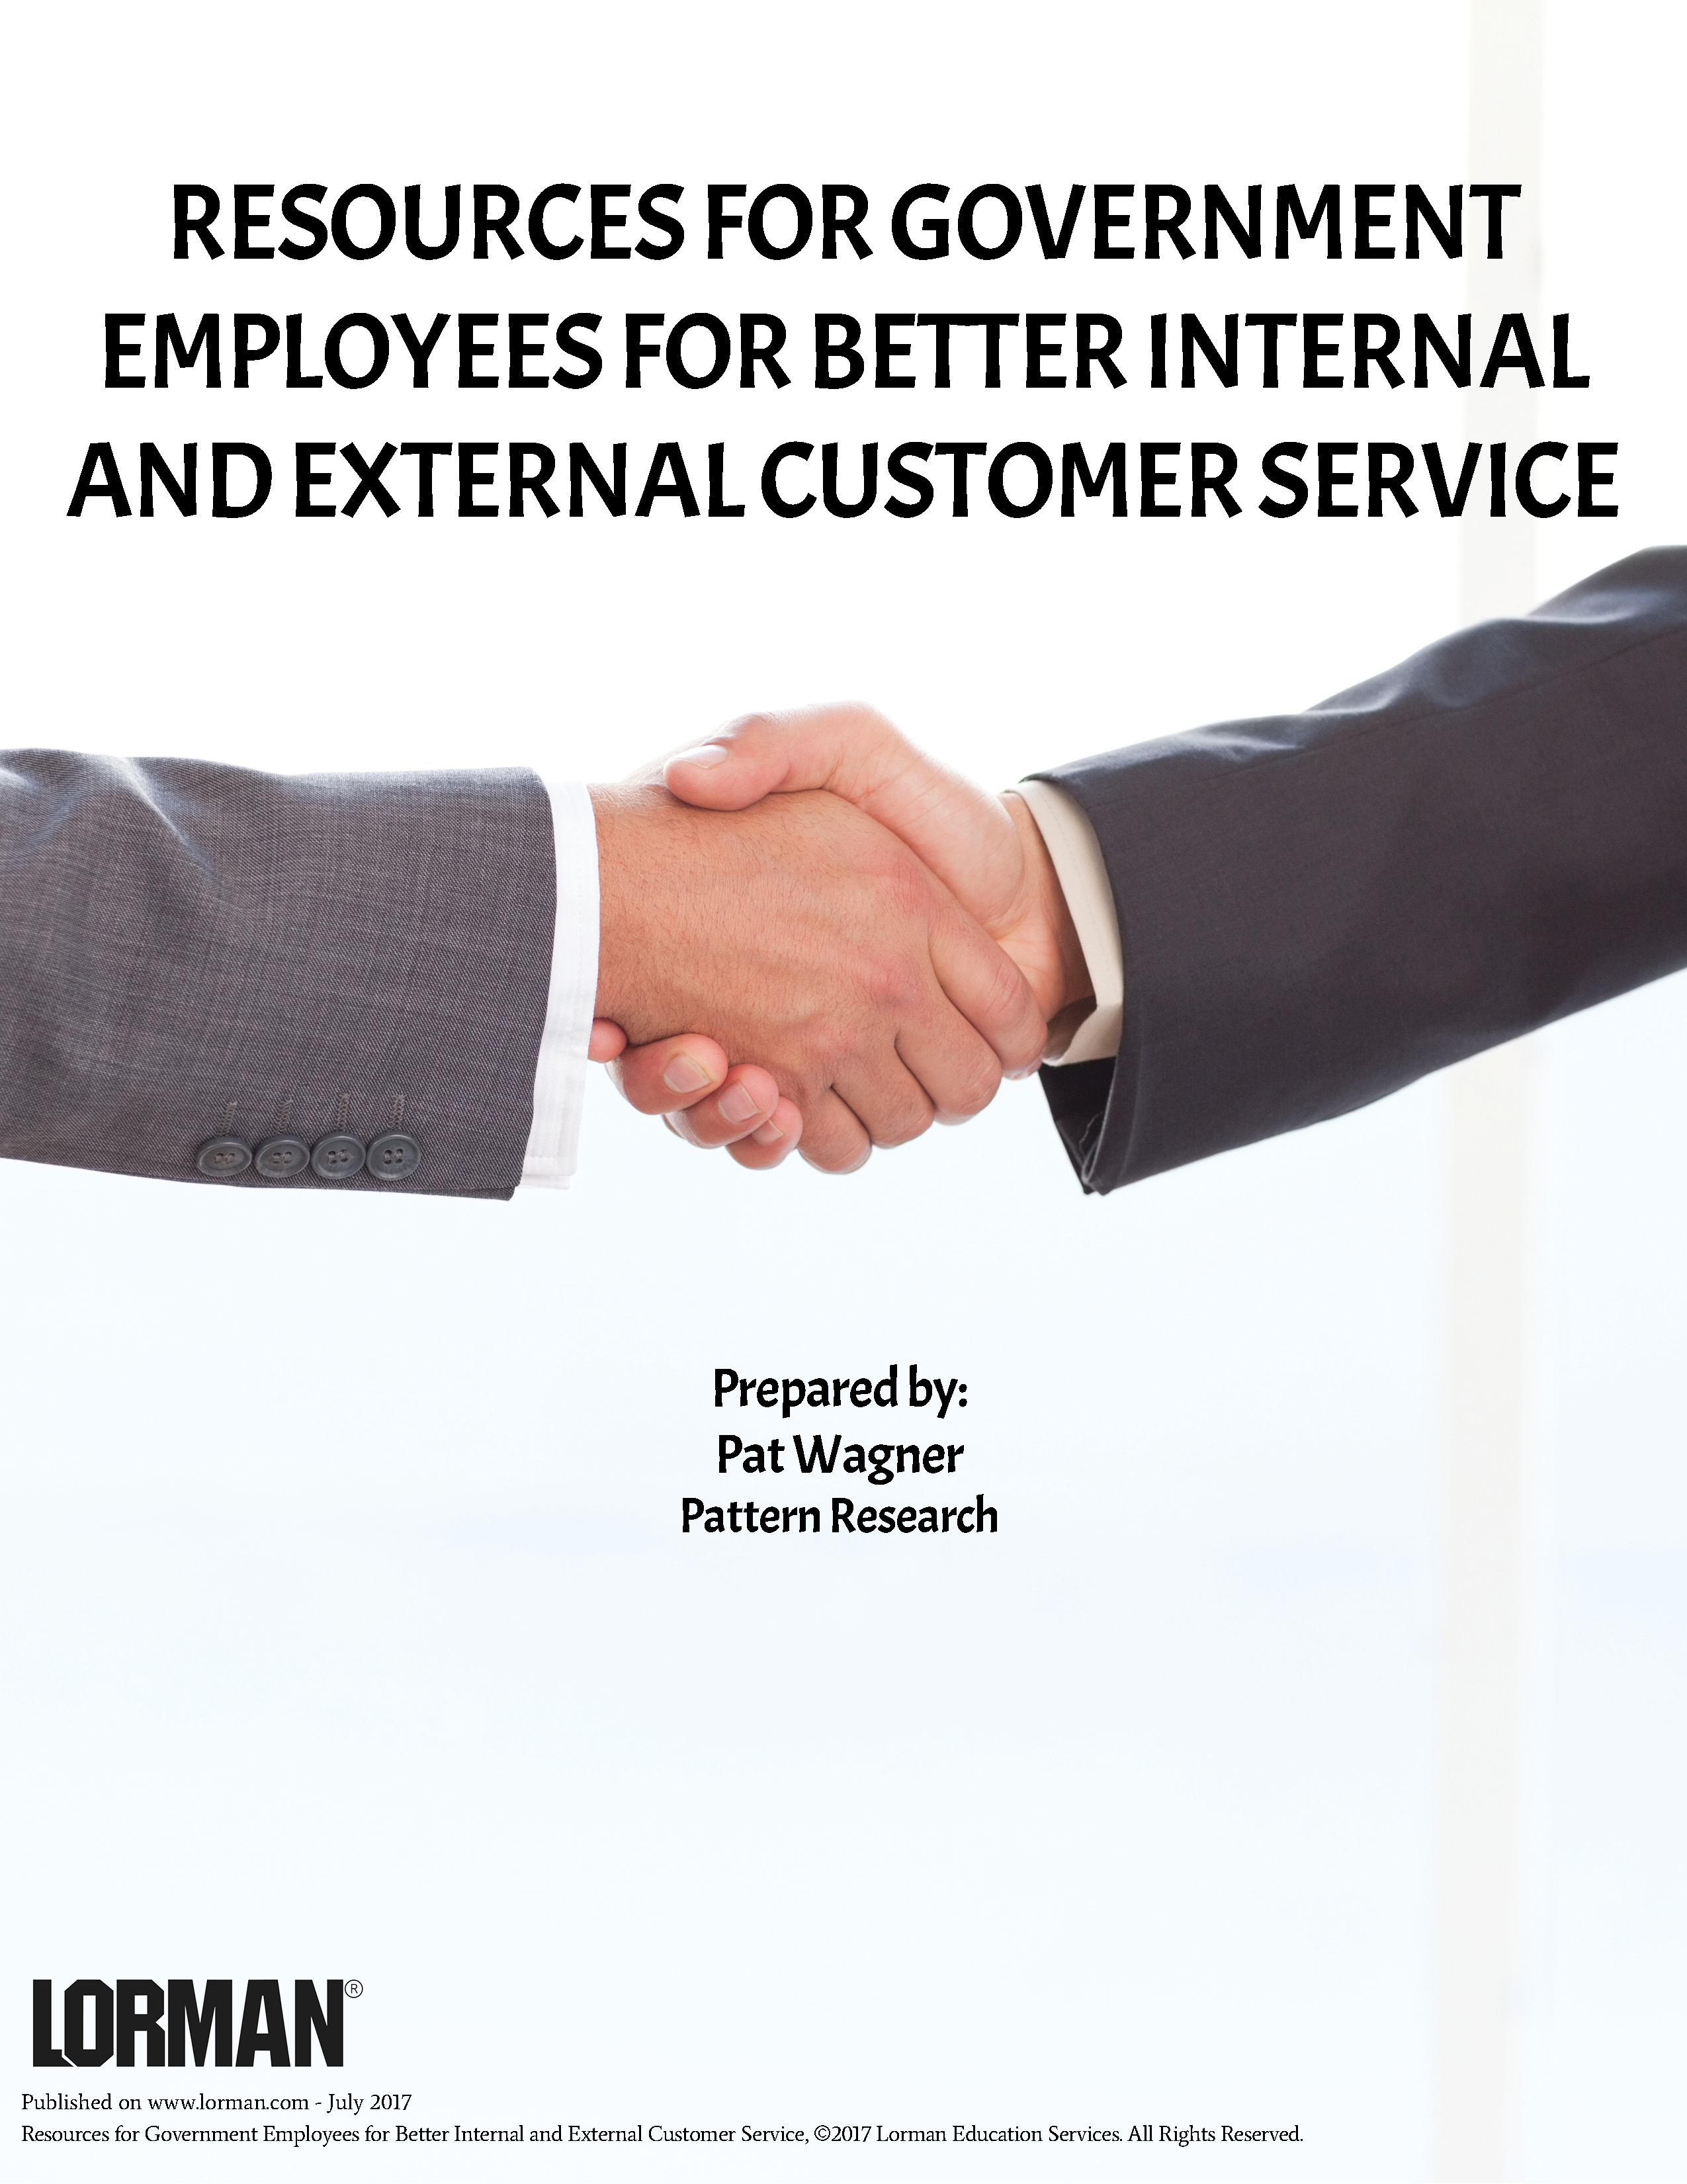 Resources for Government Employees for Better Internal and External Customer Service